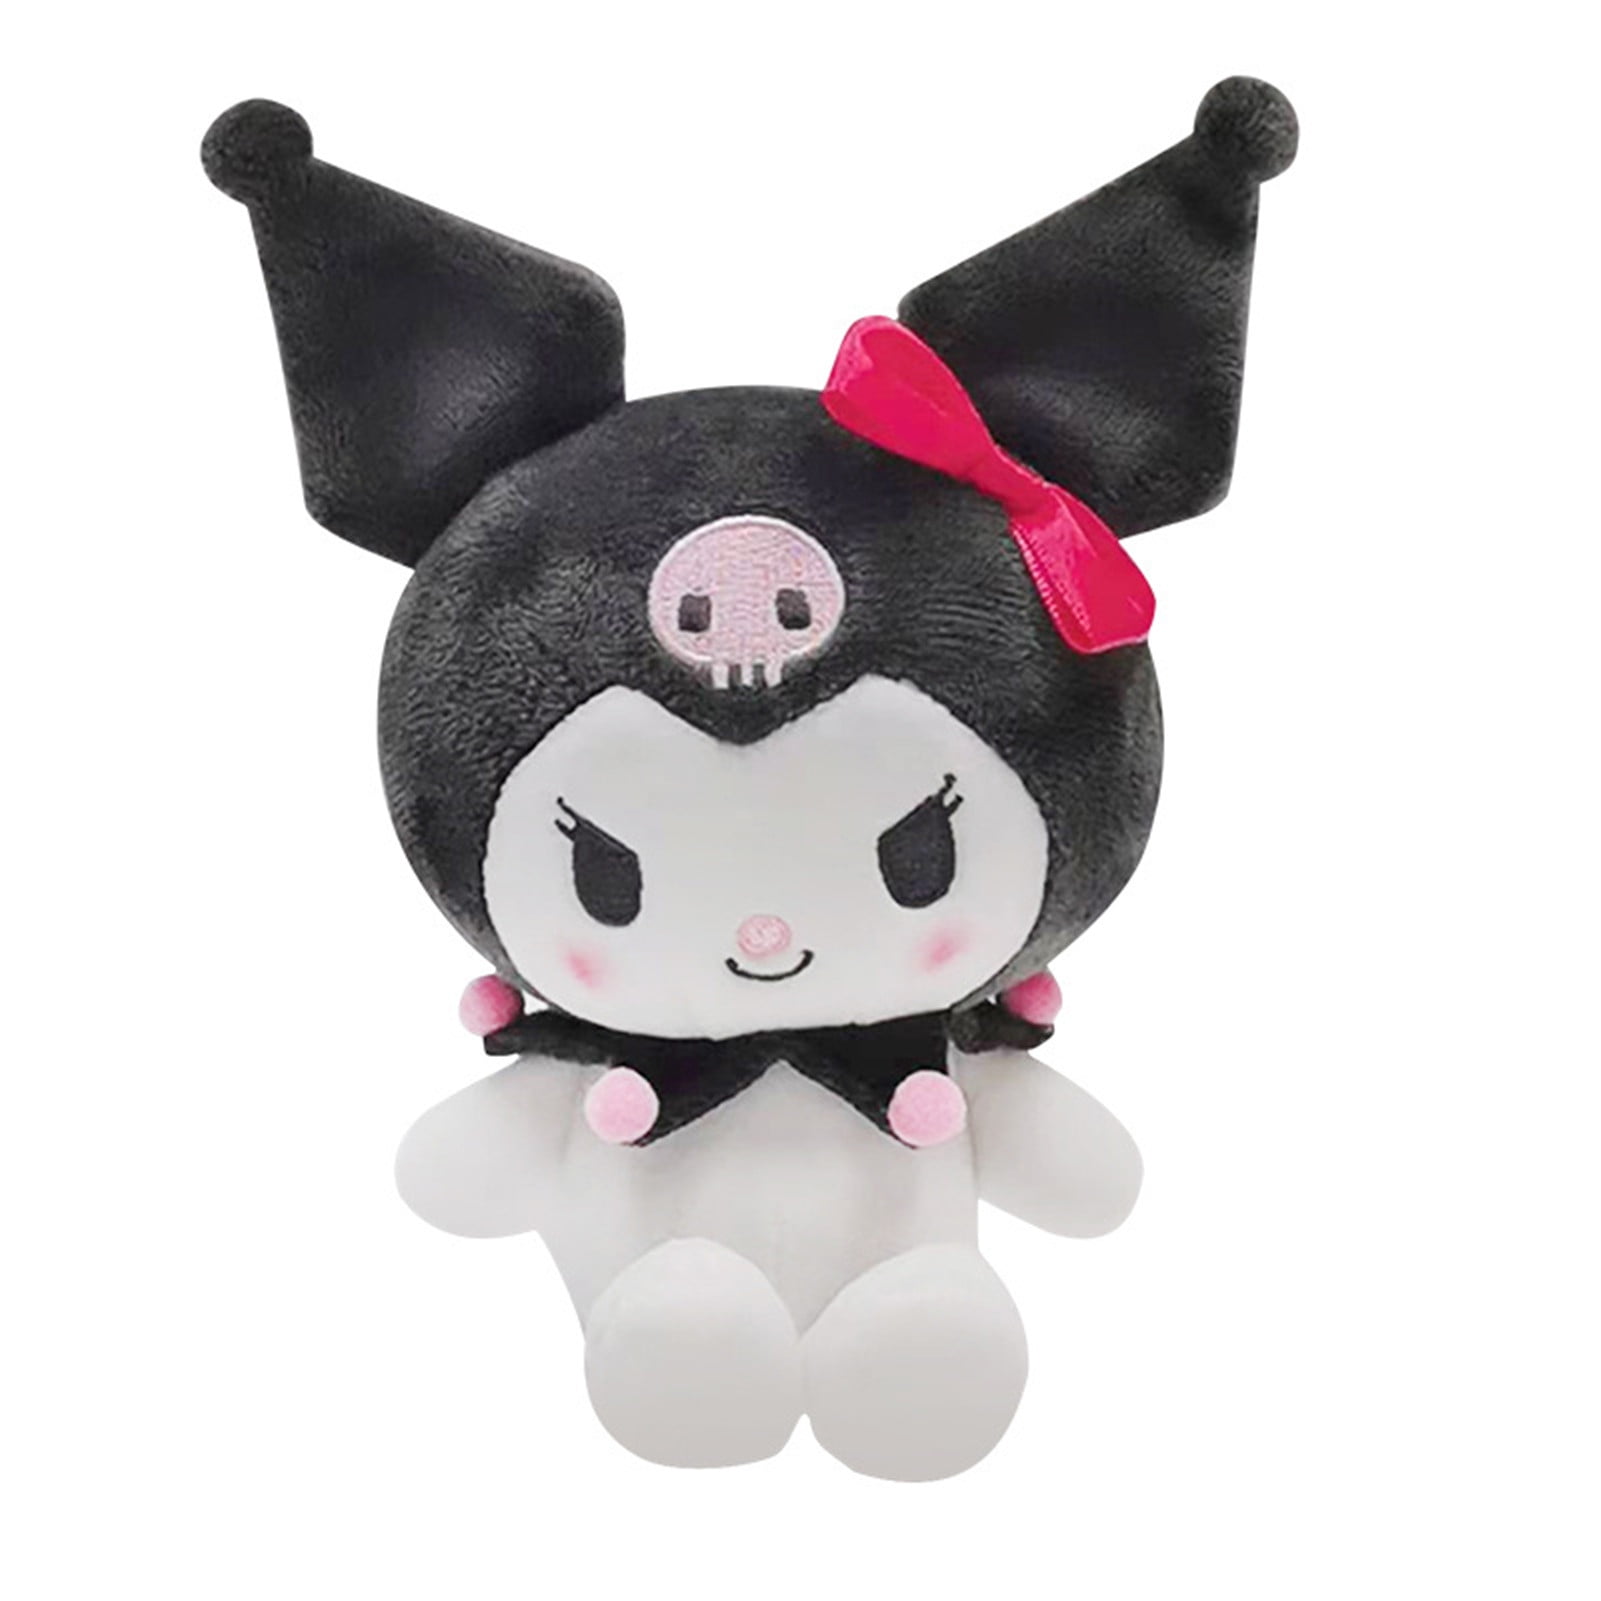 NEW Cute Kuromi Plush Doll Stuffed Toy Kid's Gift 29cm Collection Decor Gift 